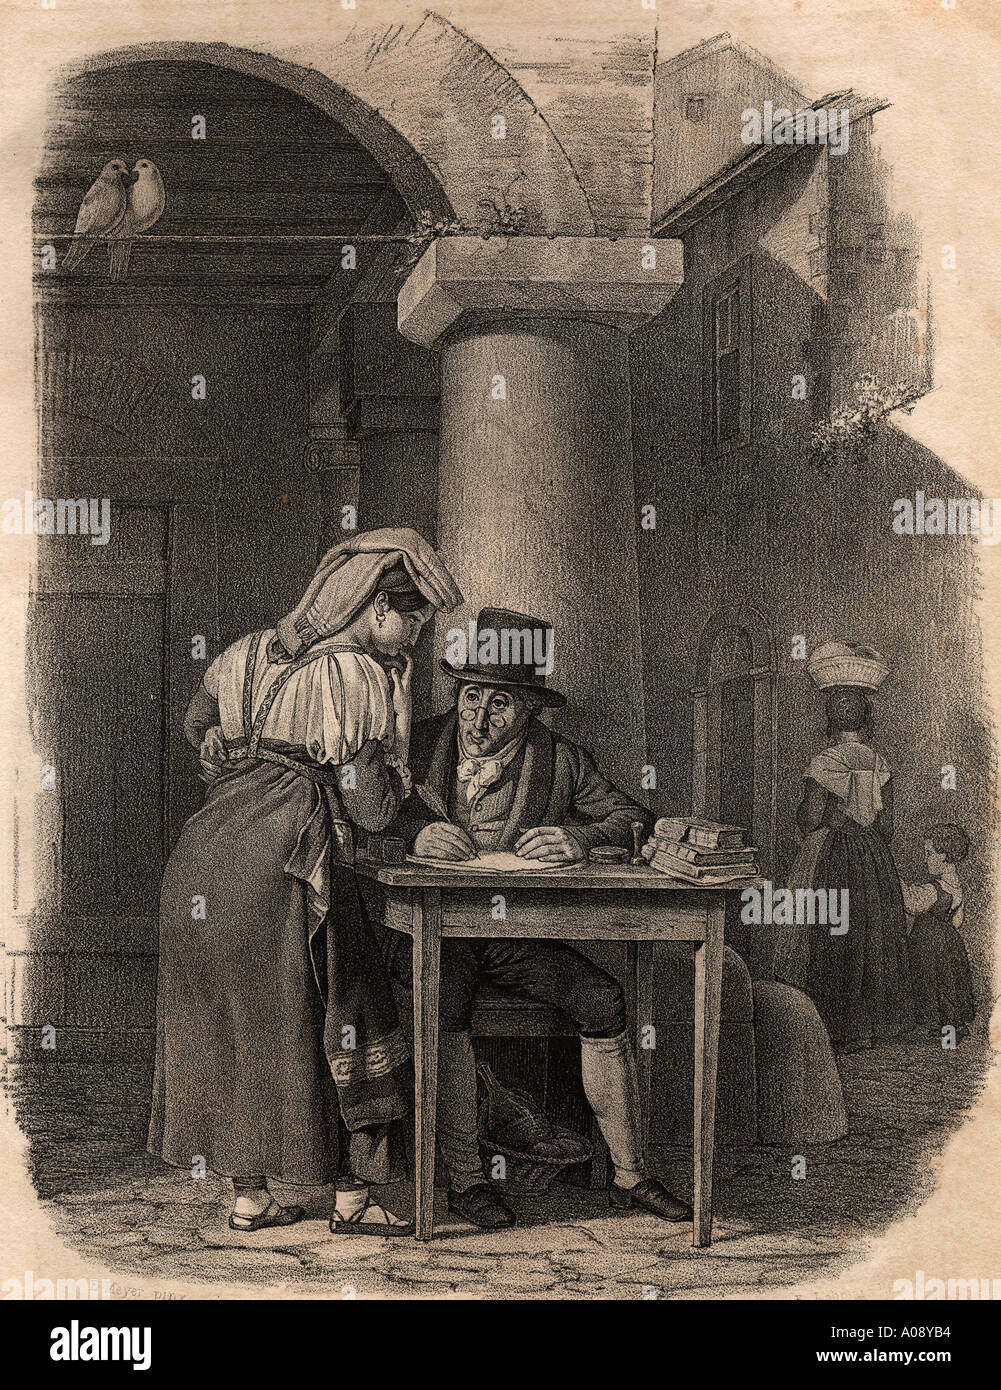 Drawing of a scribe at work - NYPL Digital Collections